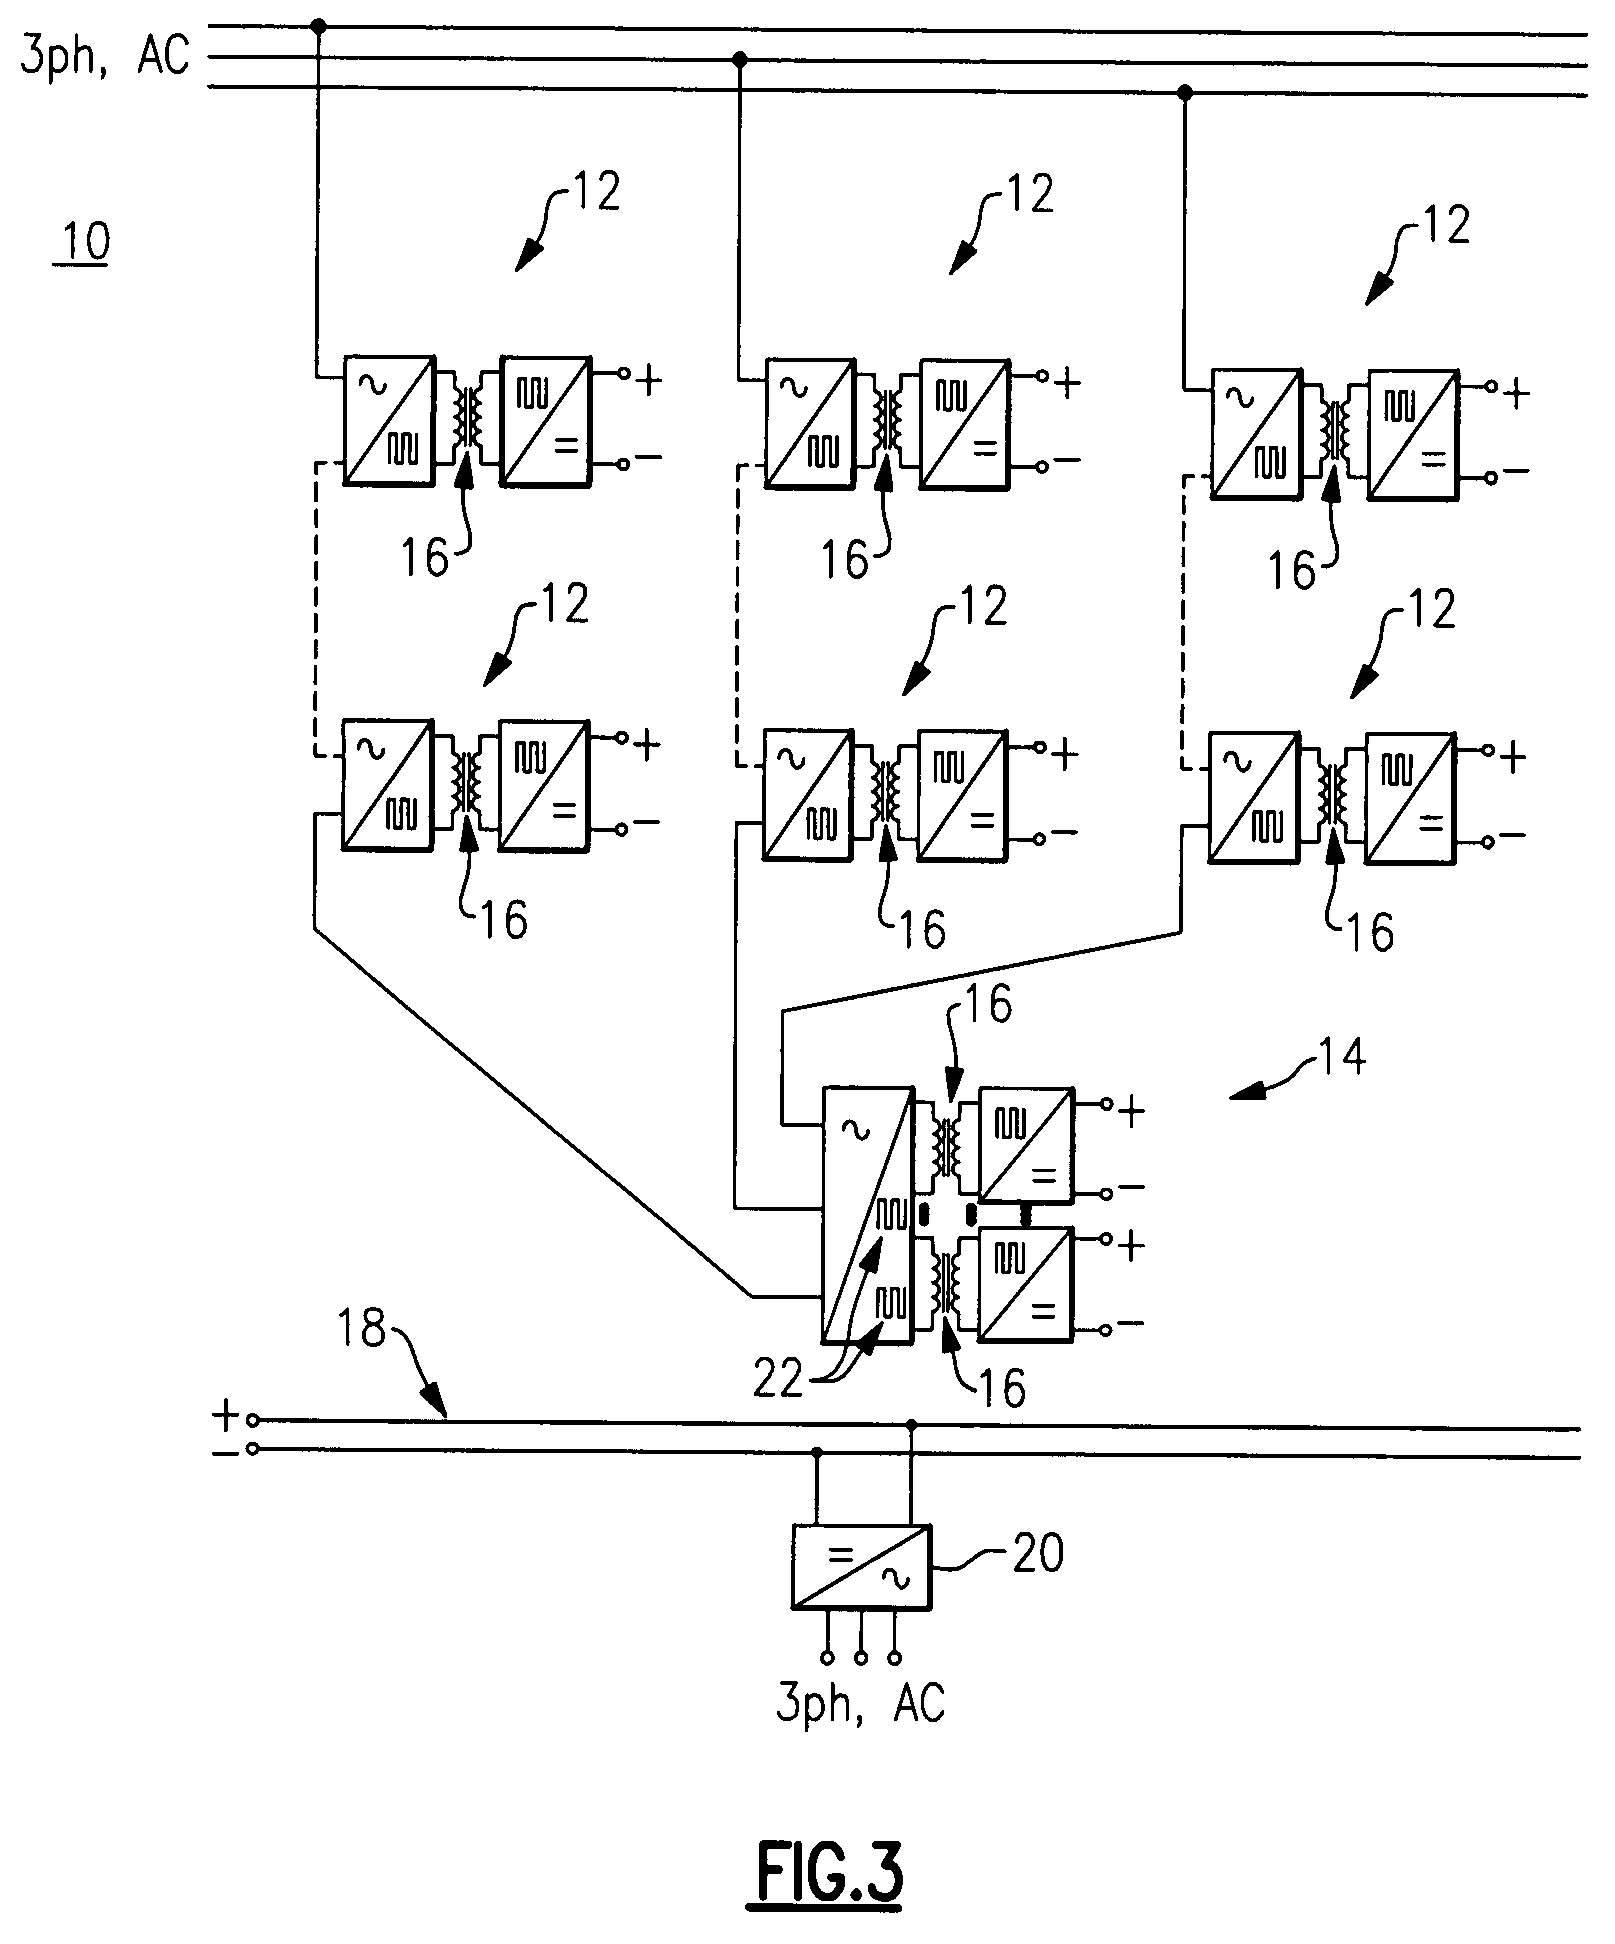 Power conversion system with galvanically isolated high frequency link